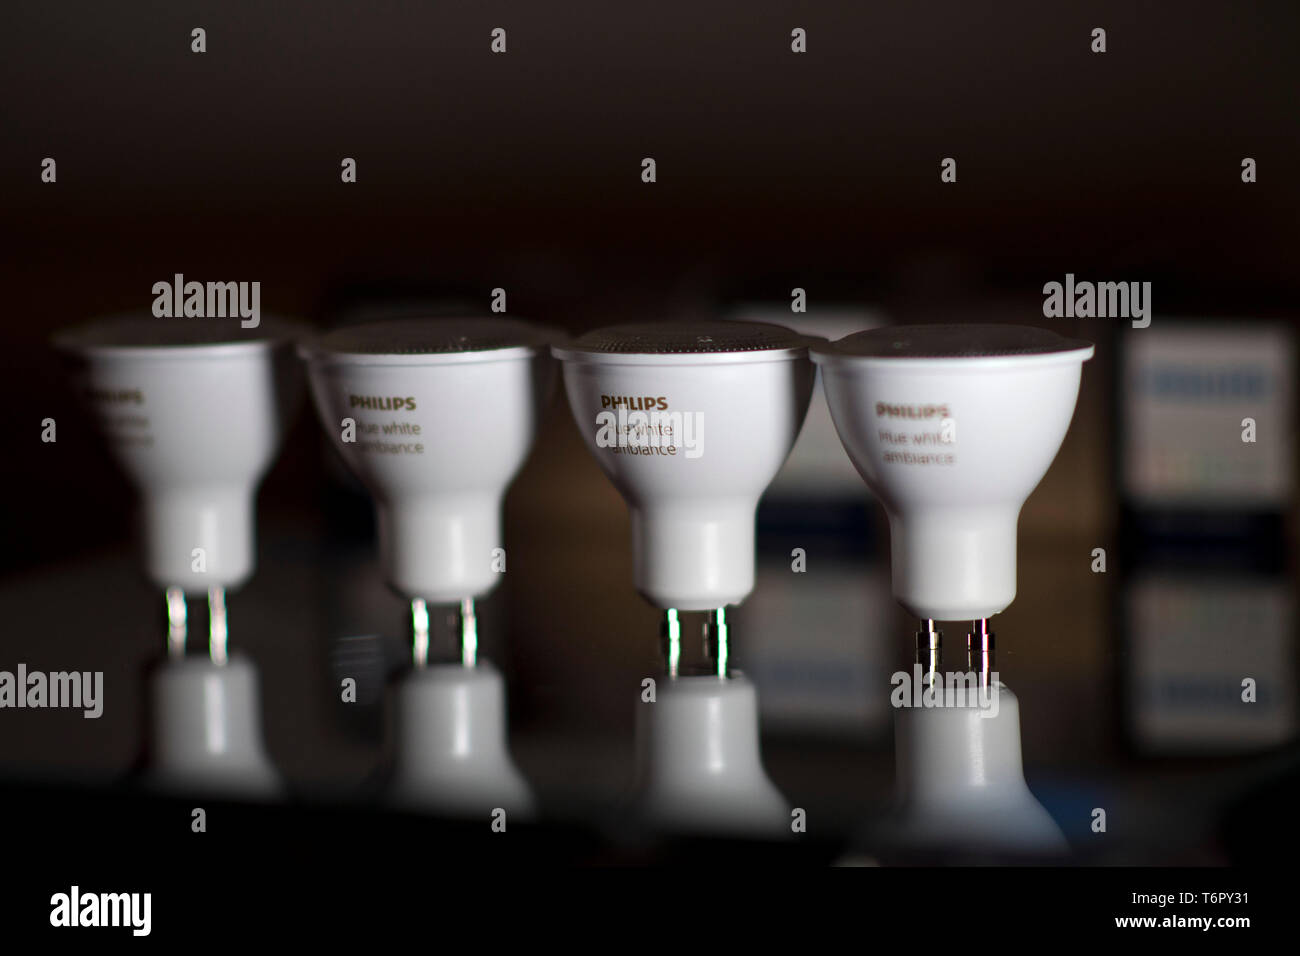 Philips Hue Ambiance GU10 light bulbs pictured in London. 1, 2019. The LED bulbs are modern smartphone voice technology Stock Photo Alamy